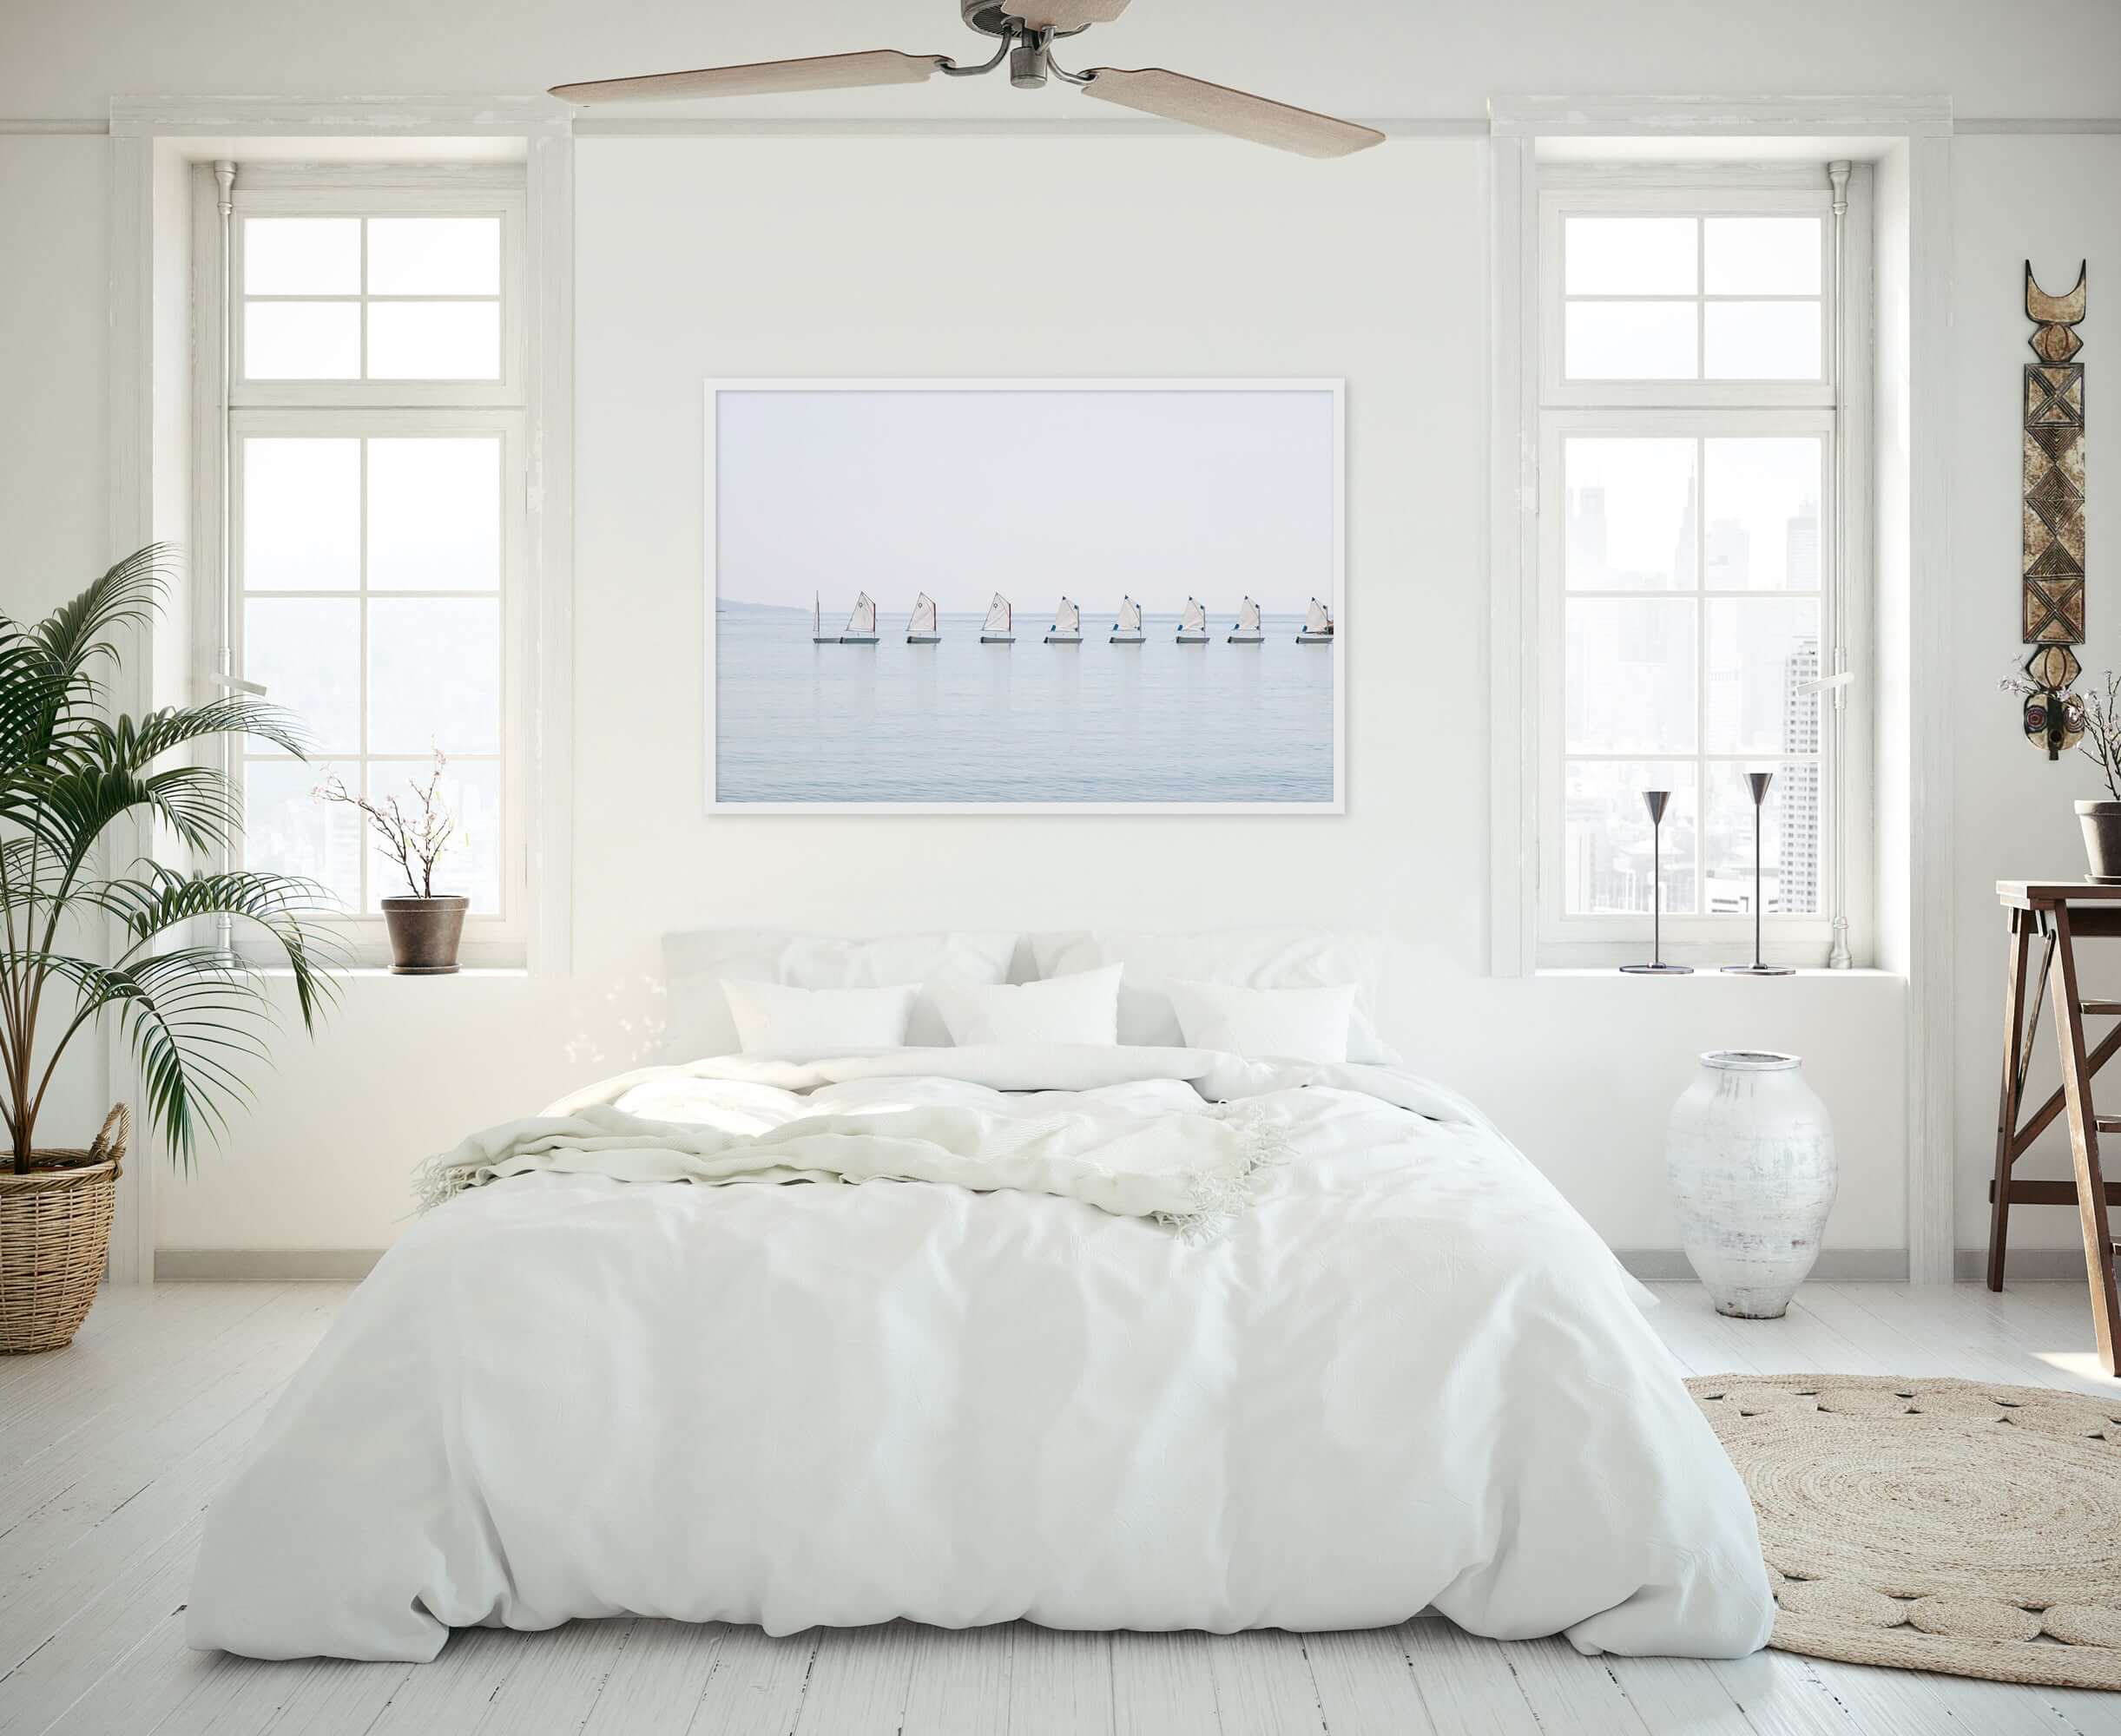 The Little Sailboats No 3 - Nautical wall art by Cattie Coyle Photography